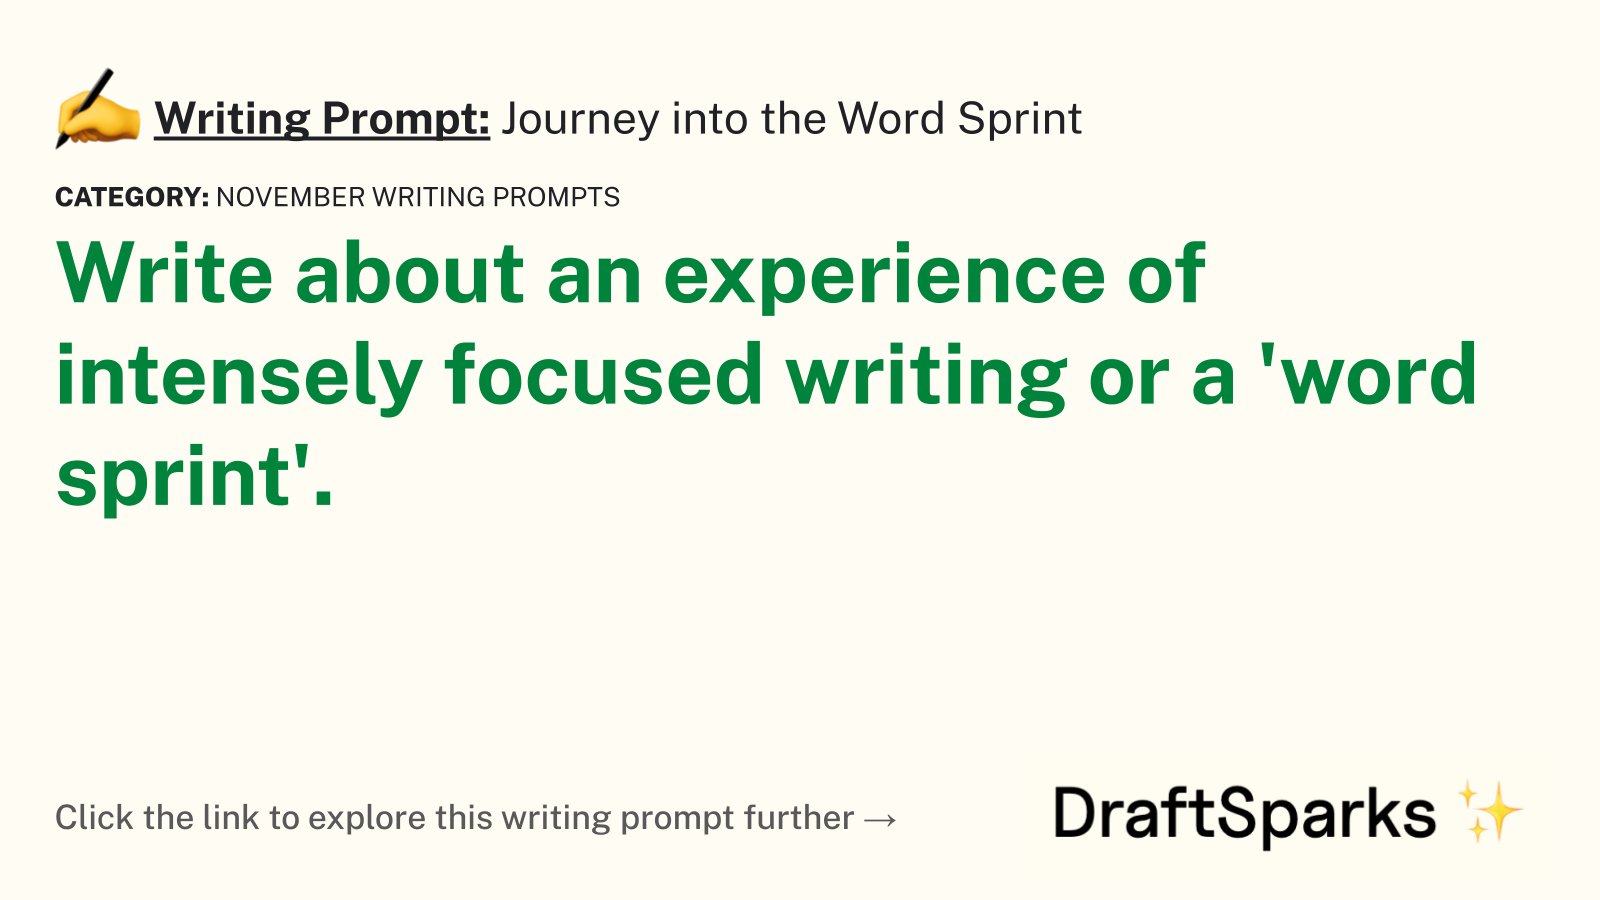 Journey into the Word Sprint